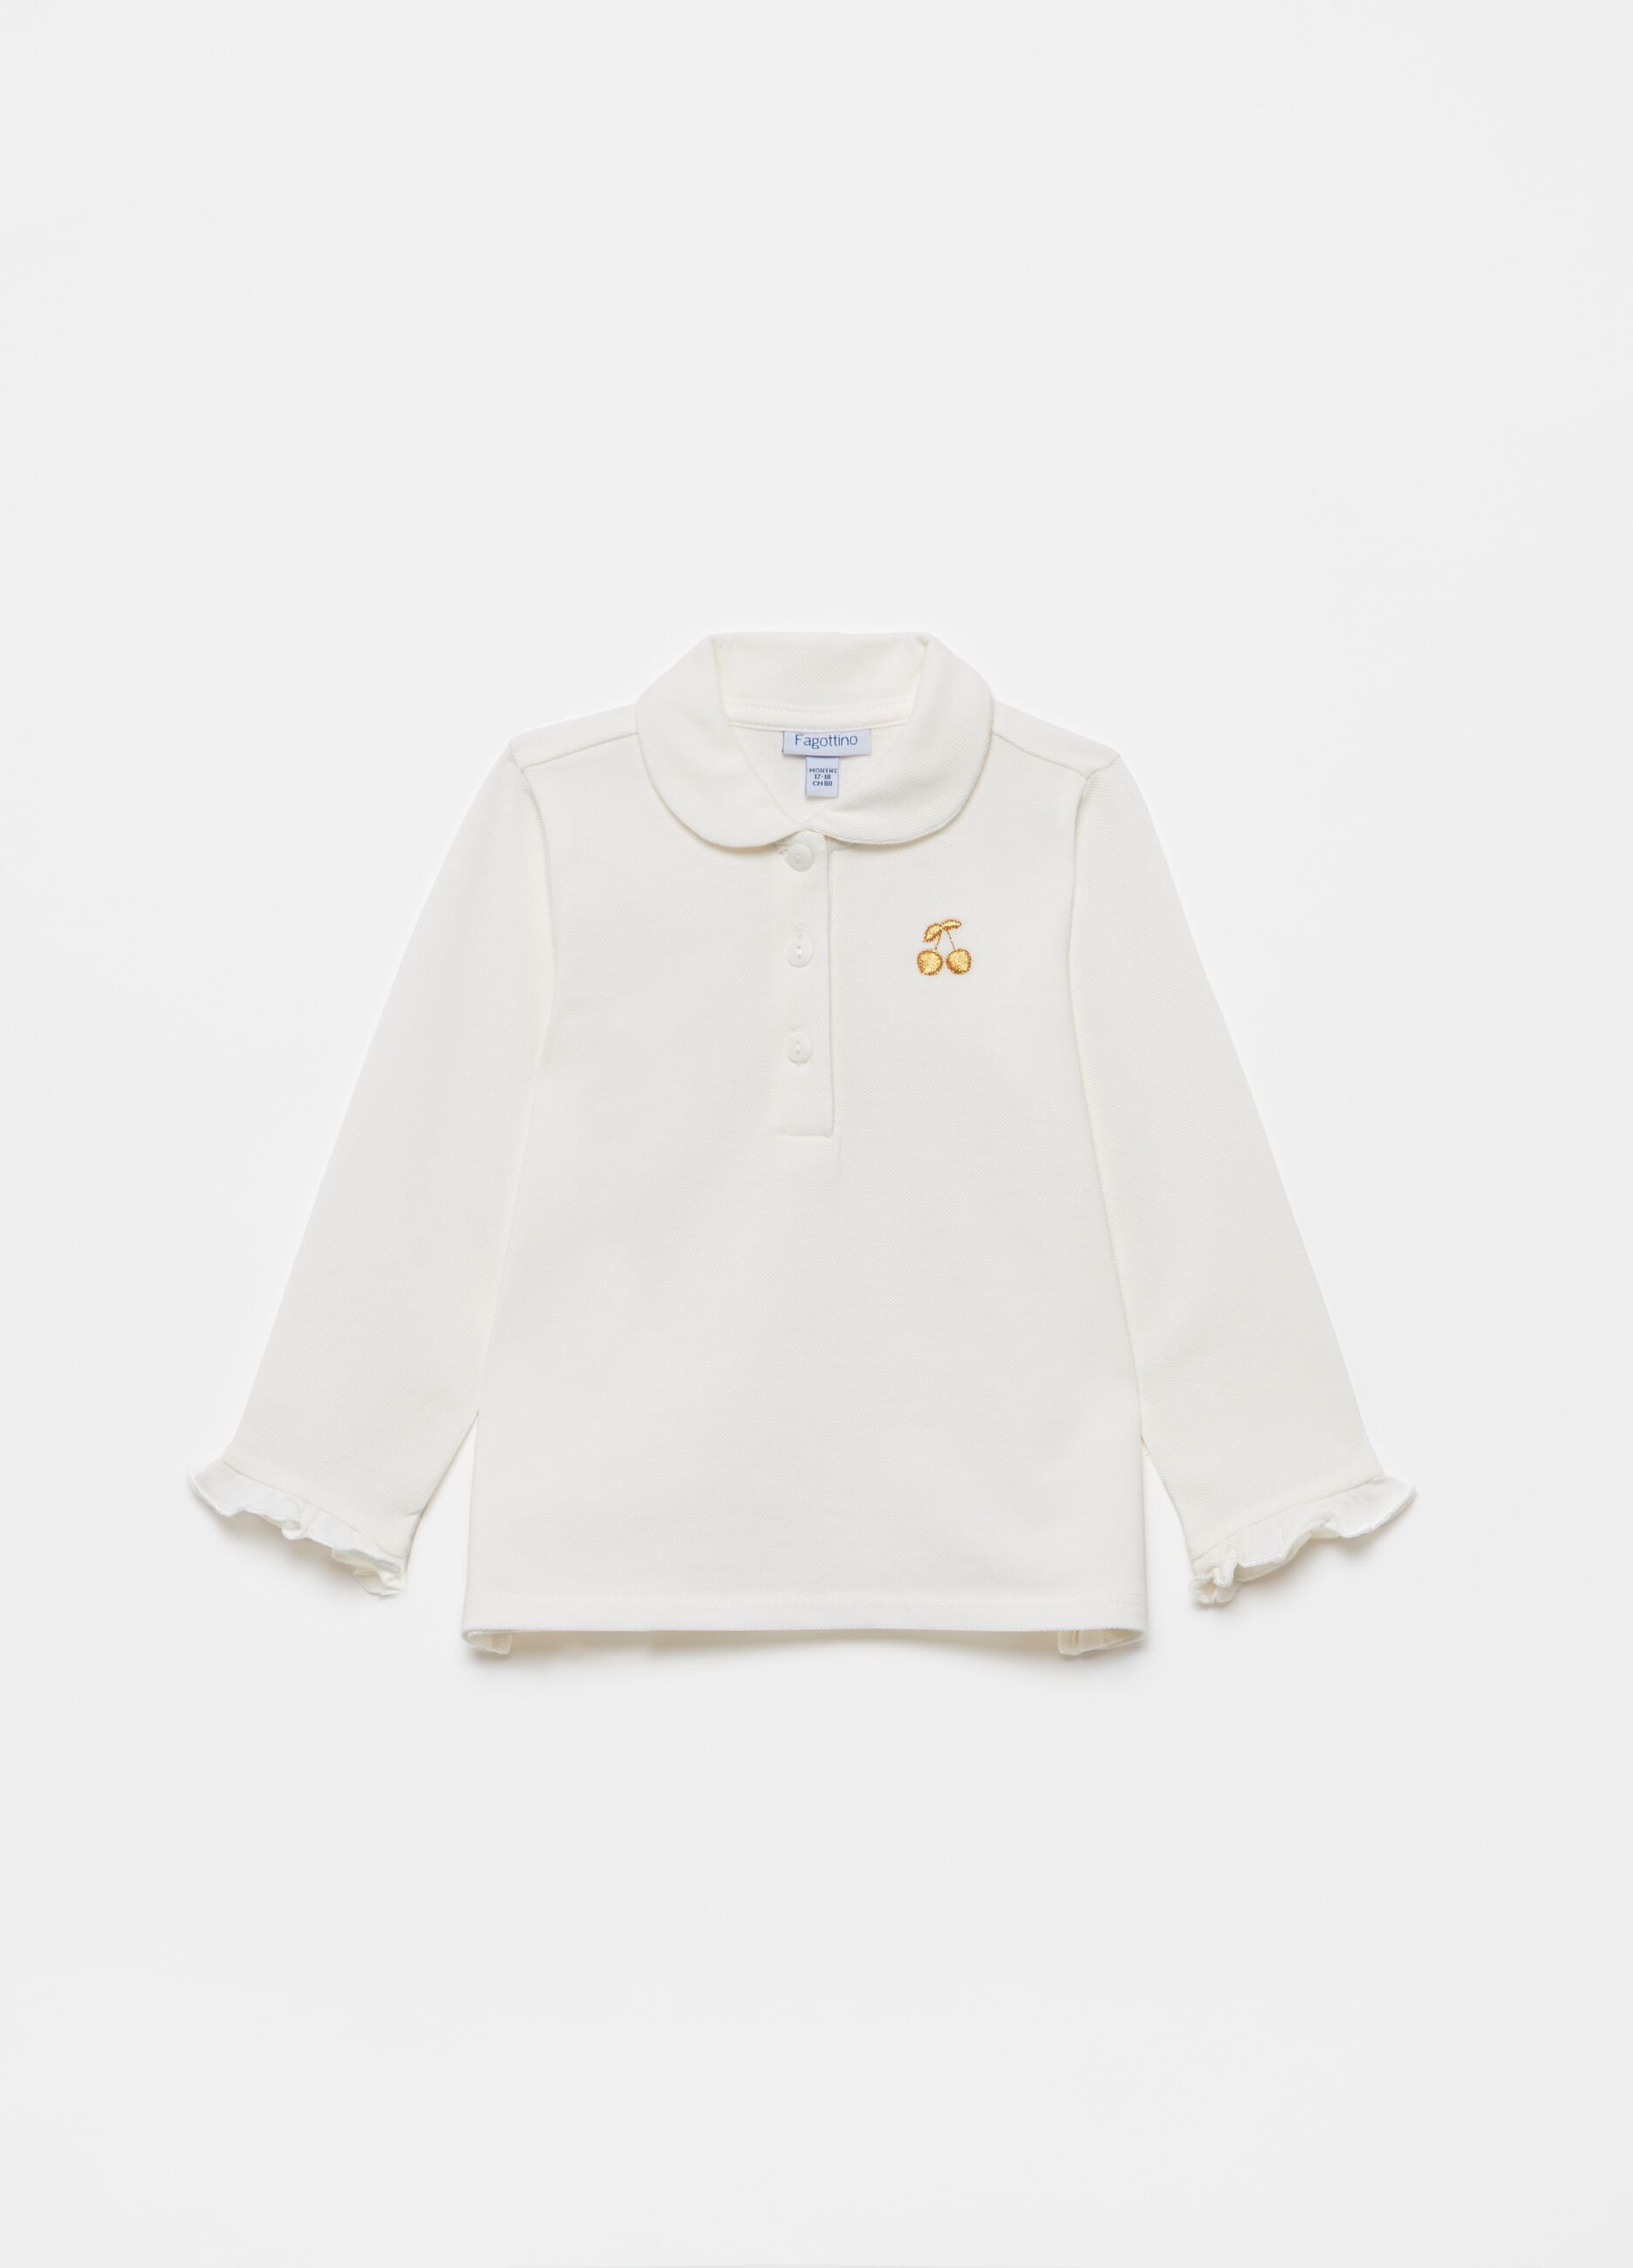 Polo shirt with small cherries embroidery and rounded collar